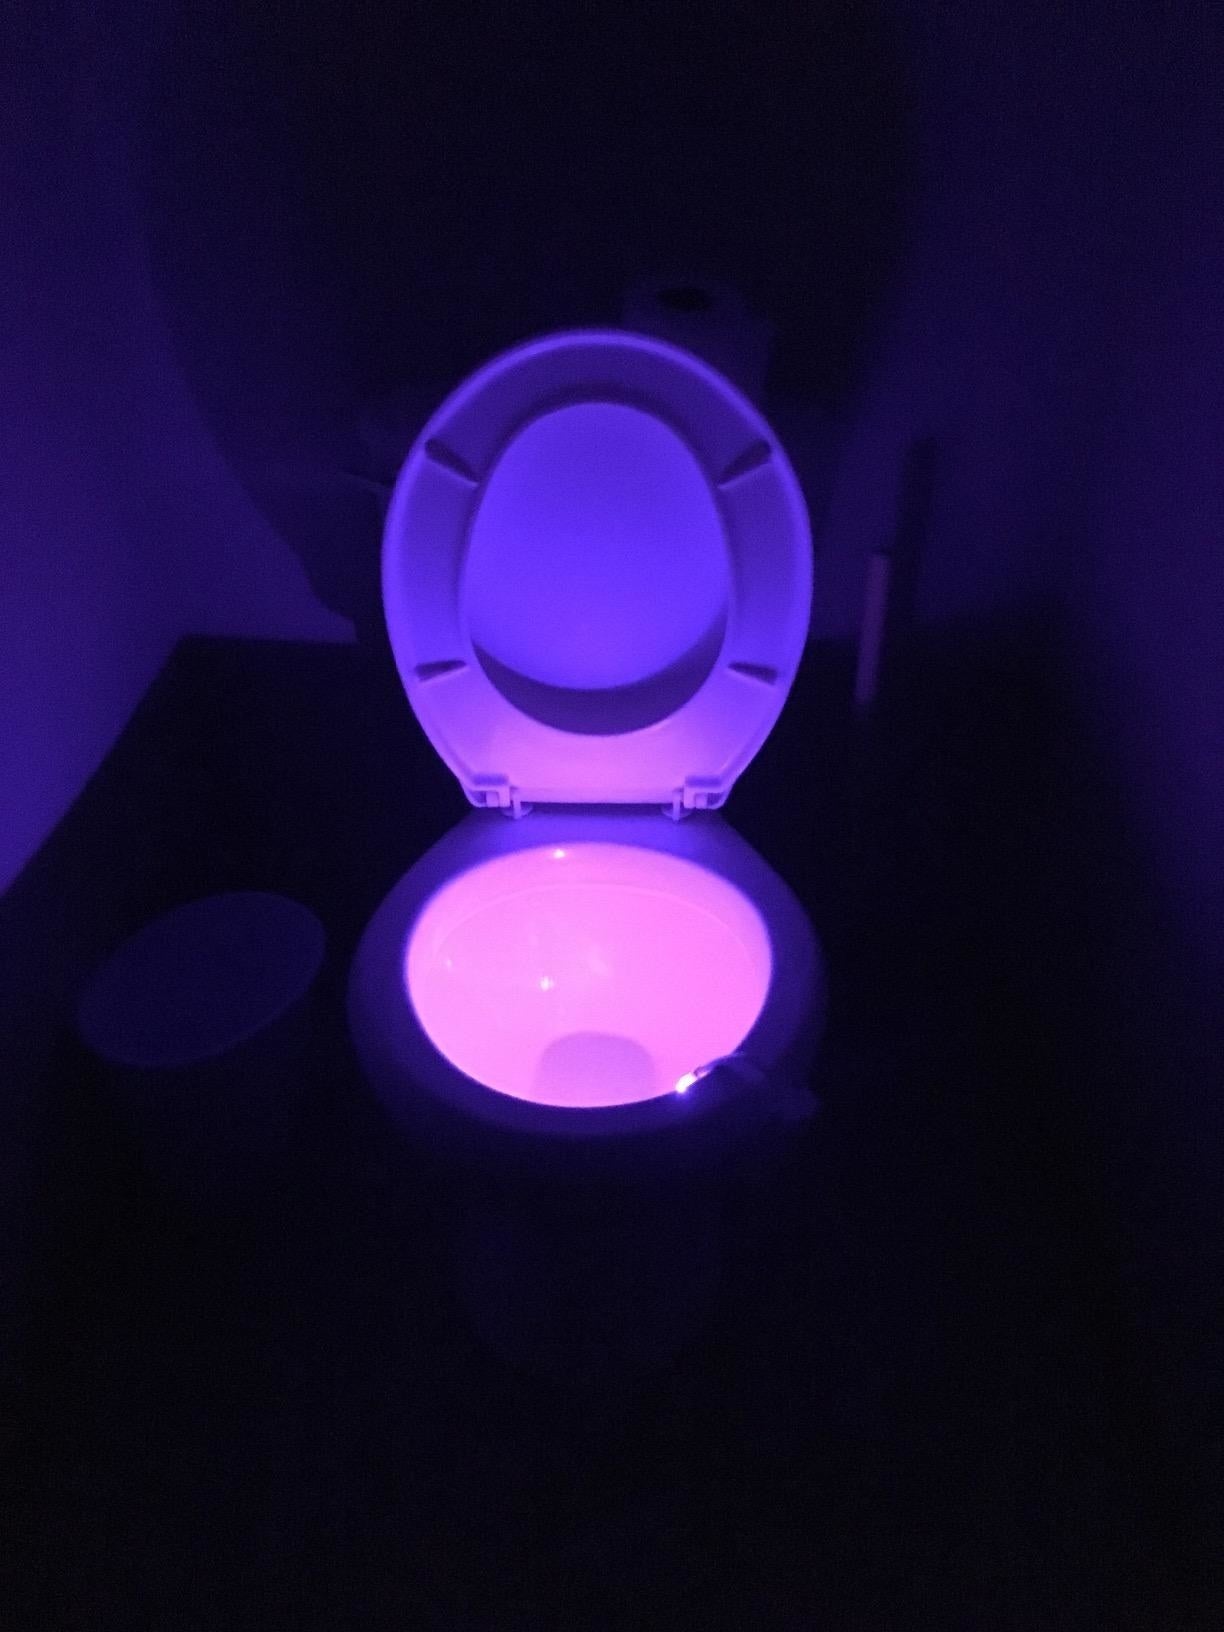 reviewer's toilet glowing with a purple light